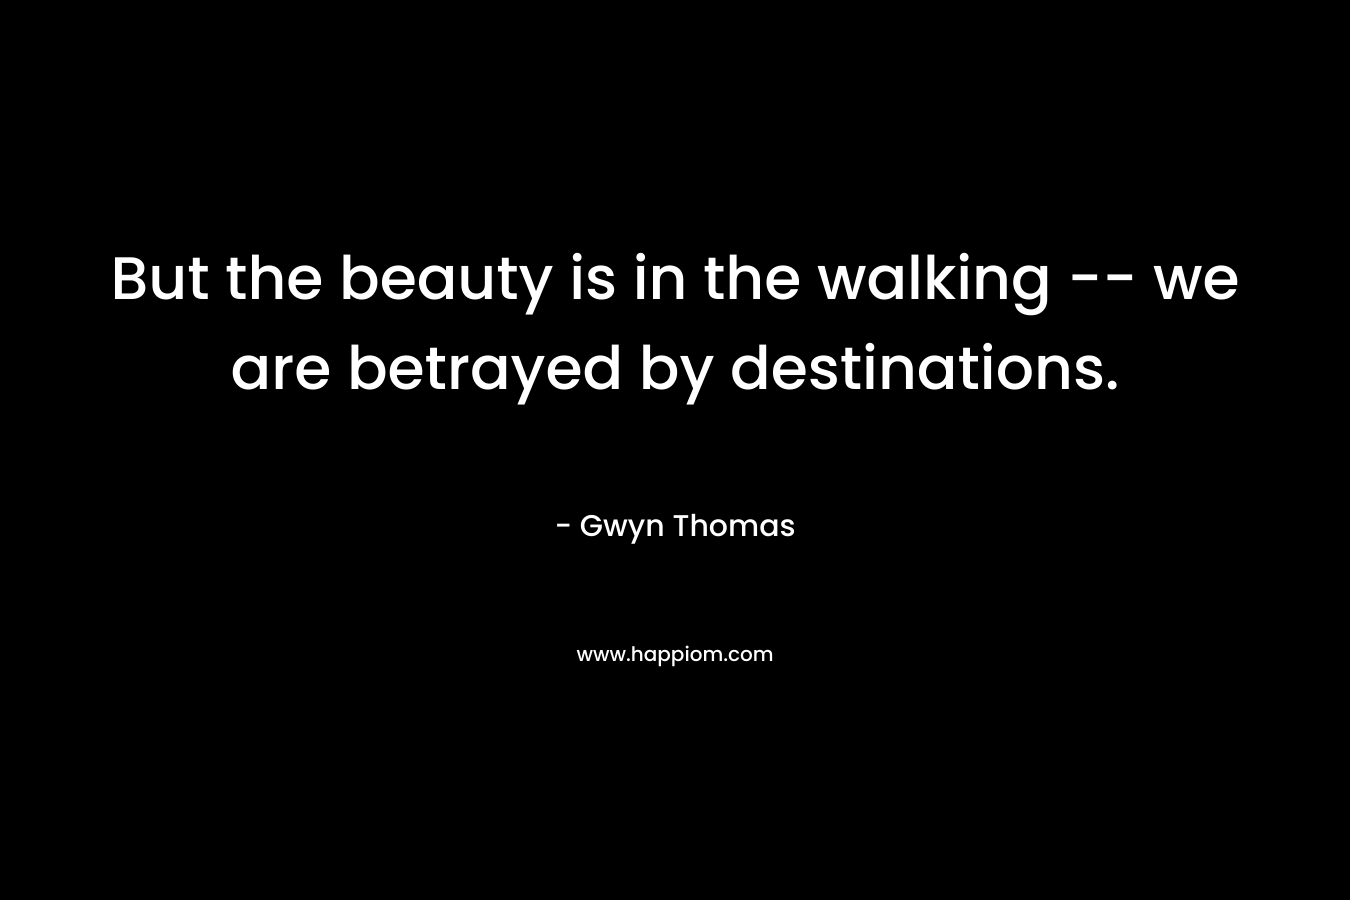 But the beauty is in the walking -- we are betrayed by destinations.